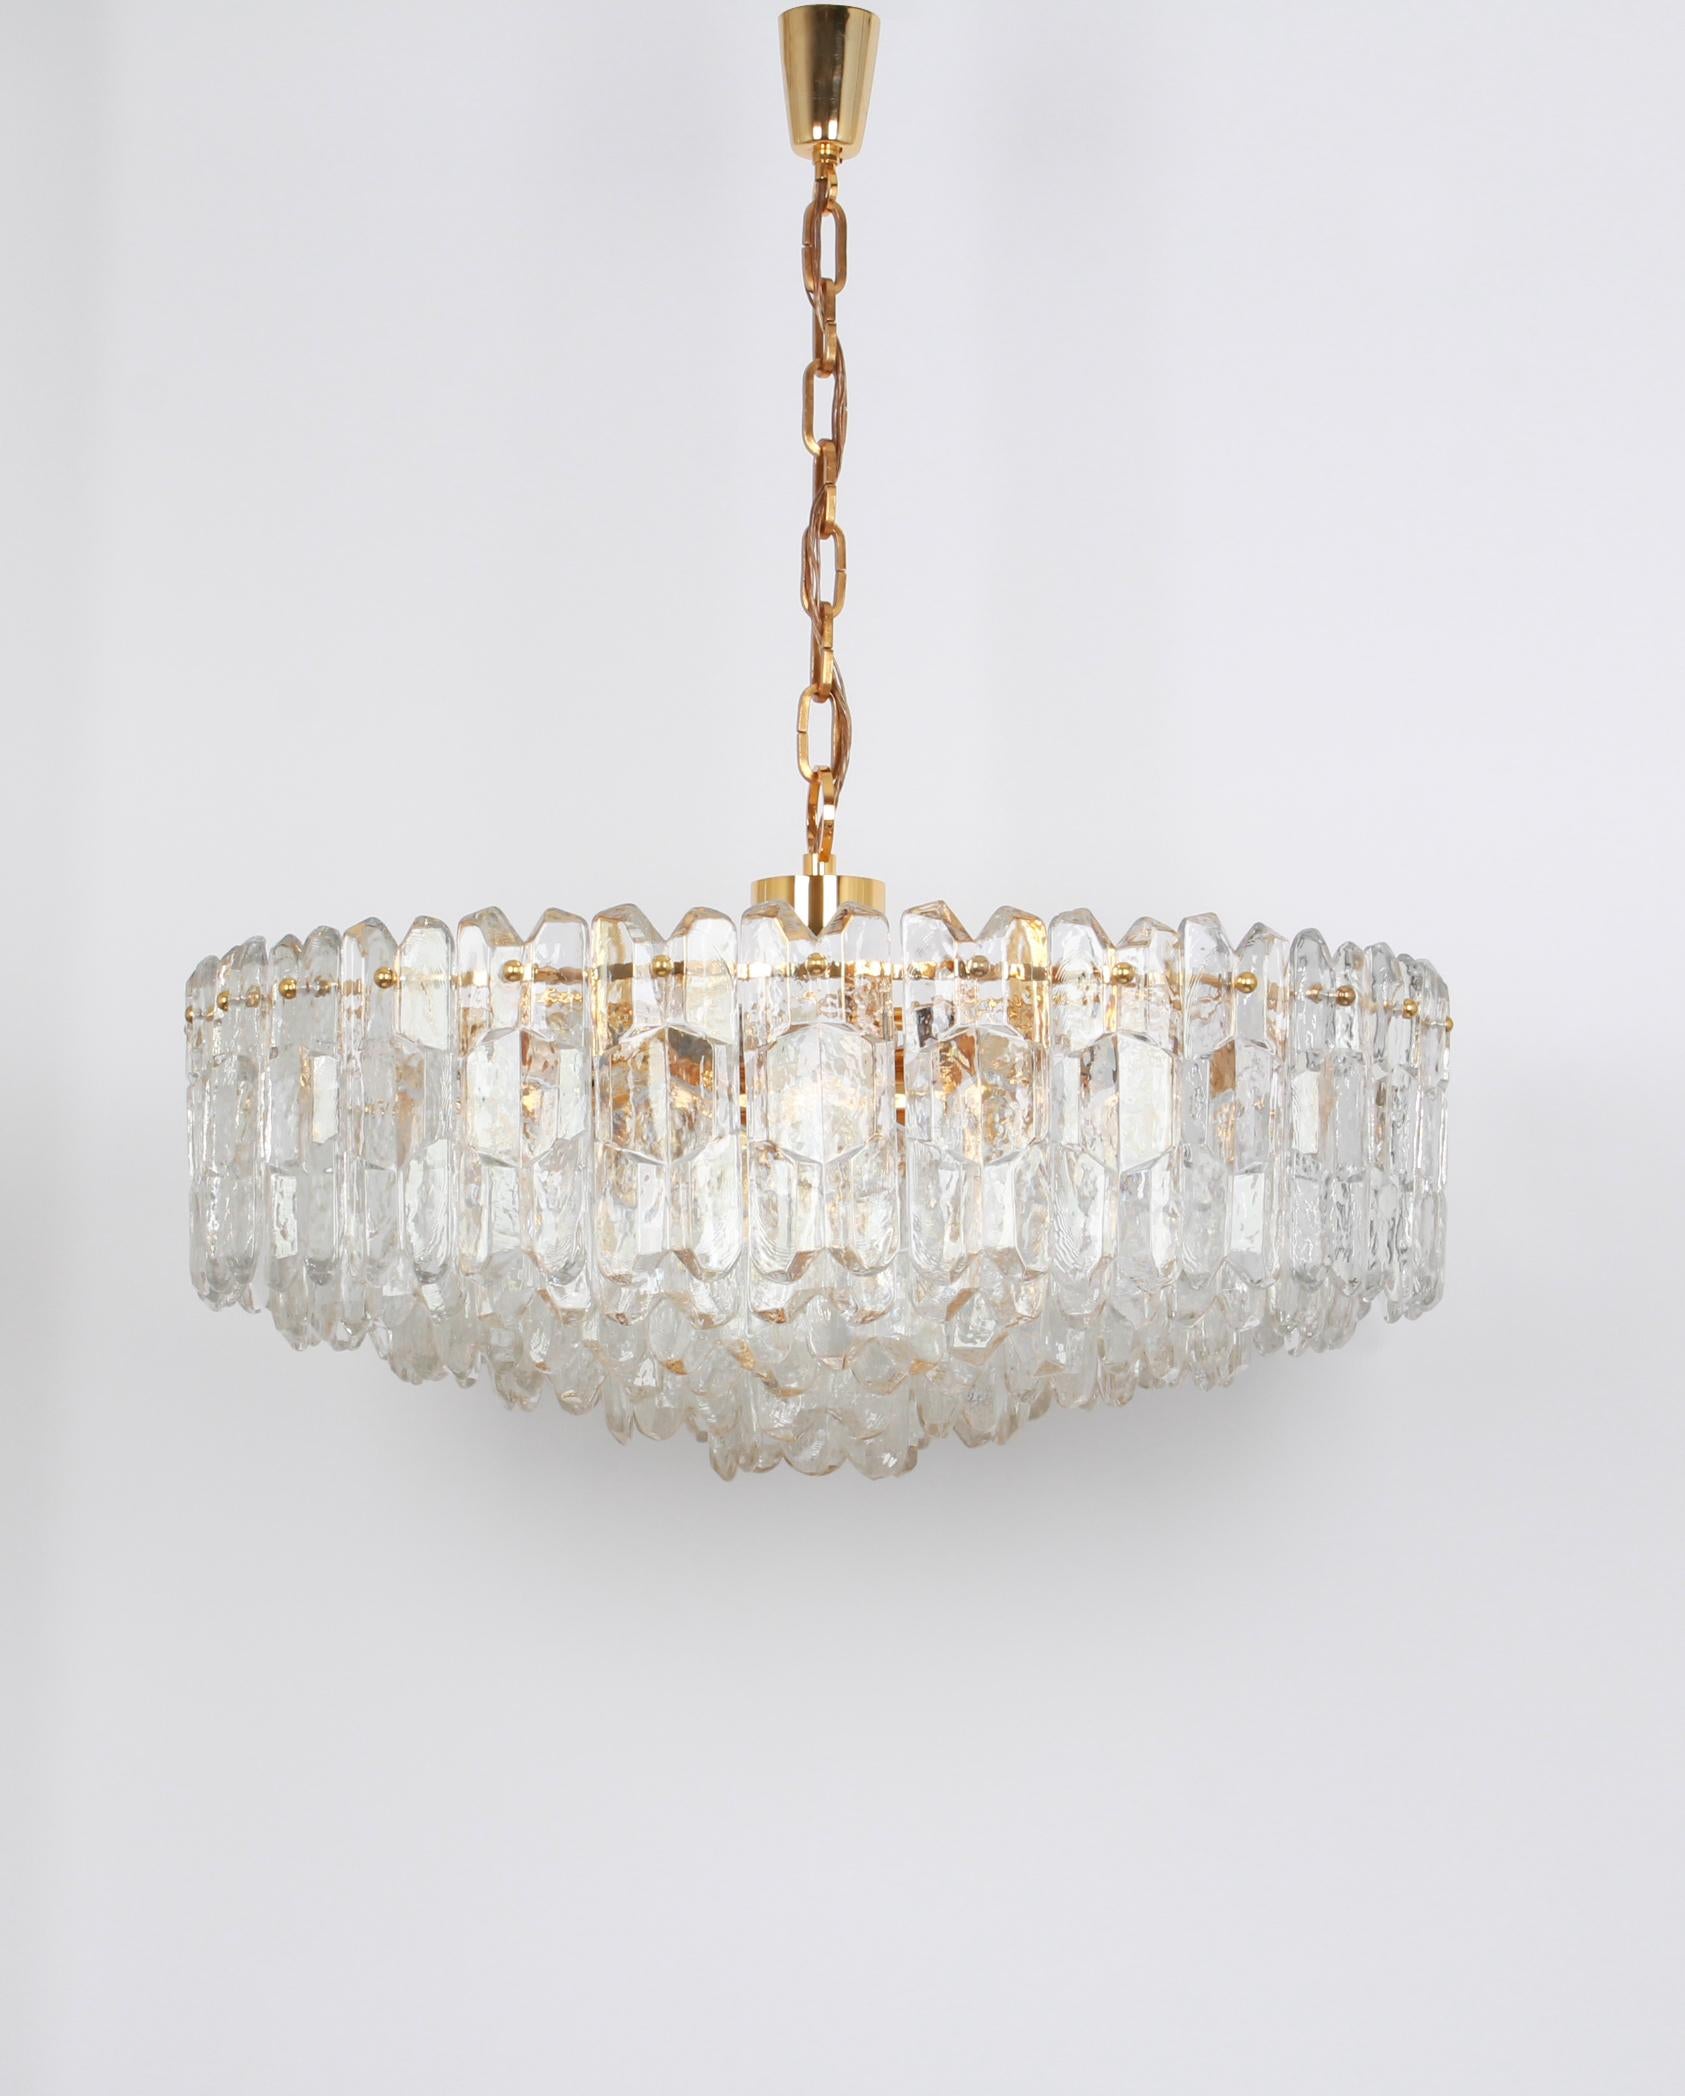 A Stunning large Chandelier with 24-carat gold-plated brass frame and clear, brilliant glass made by Kalmar (Series: Palazzo), Austria, manufactured, circa 1970-1979.
Six tiers structure gathers many structured glasses, beautifully refracting the